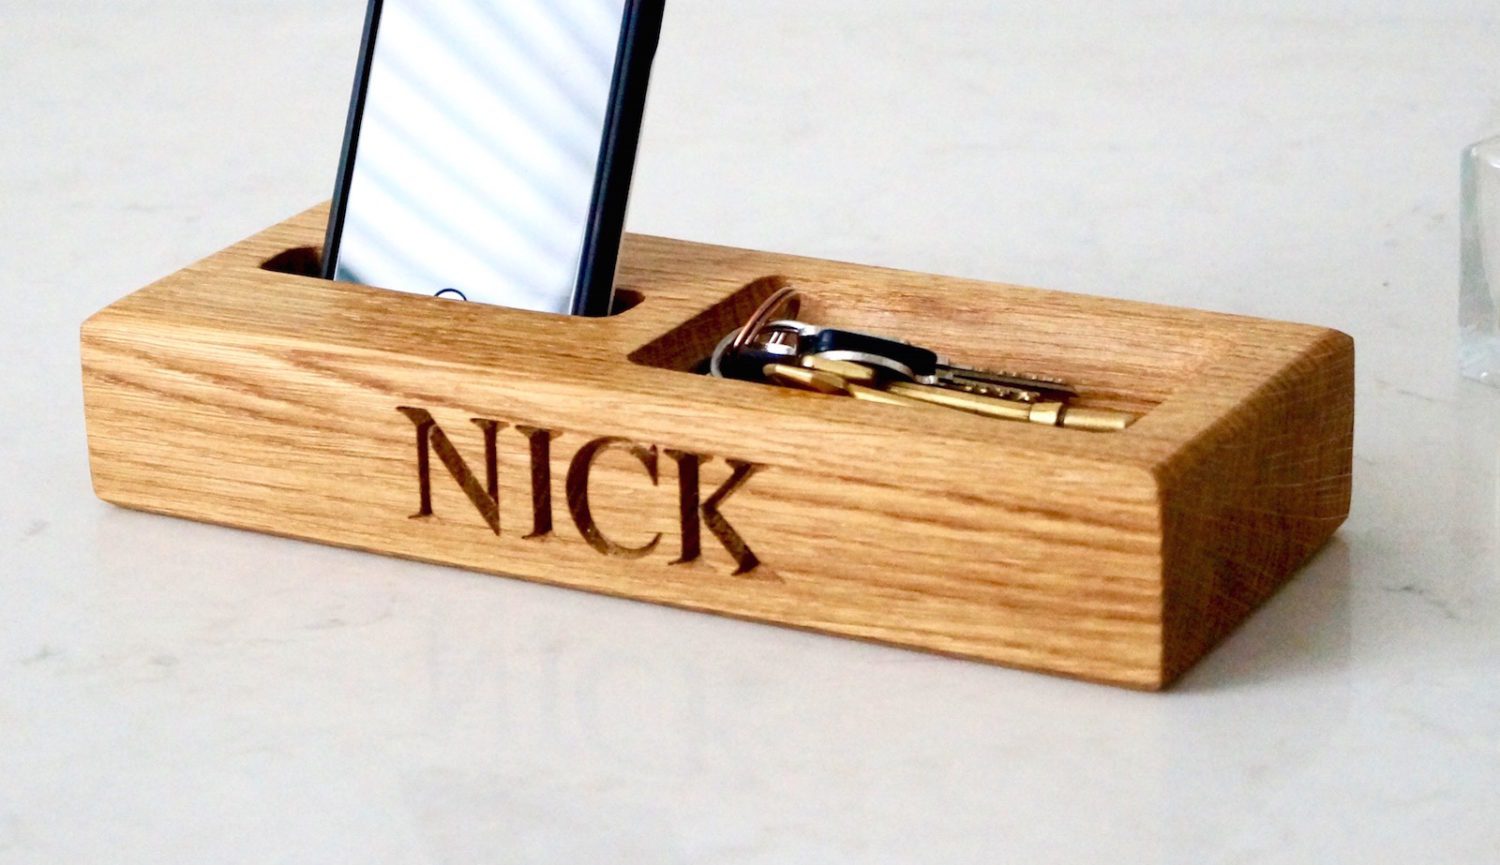 engraved-wooden-gift-ideas-makemesomethingspecial.com